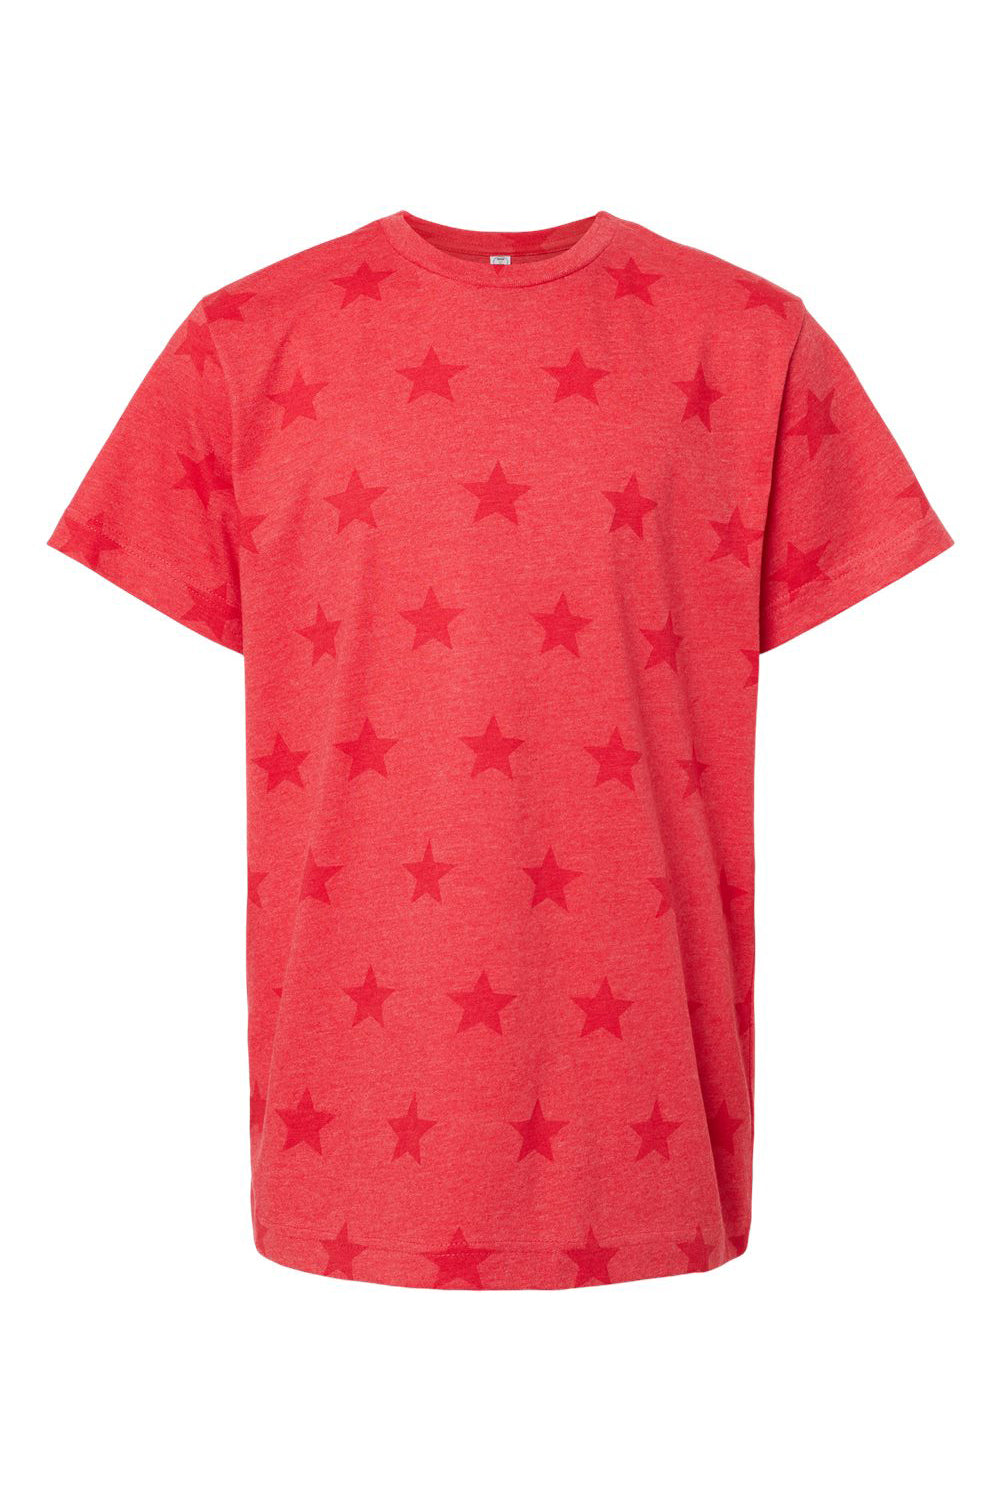 Code Five 2229 Youth Star Print Short Sleeve Crewneck T-Shirt Red Flat Front